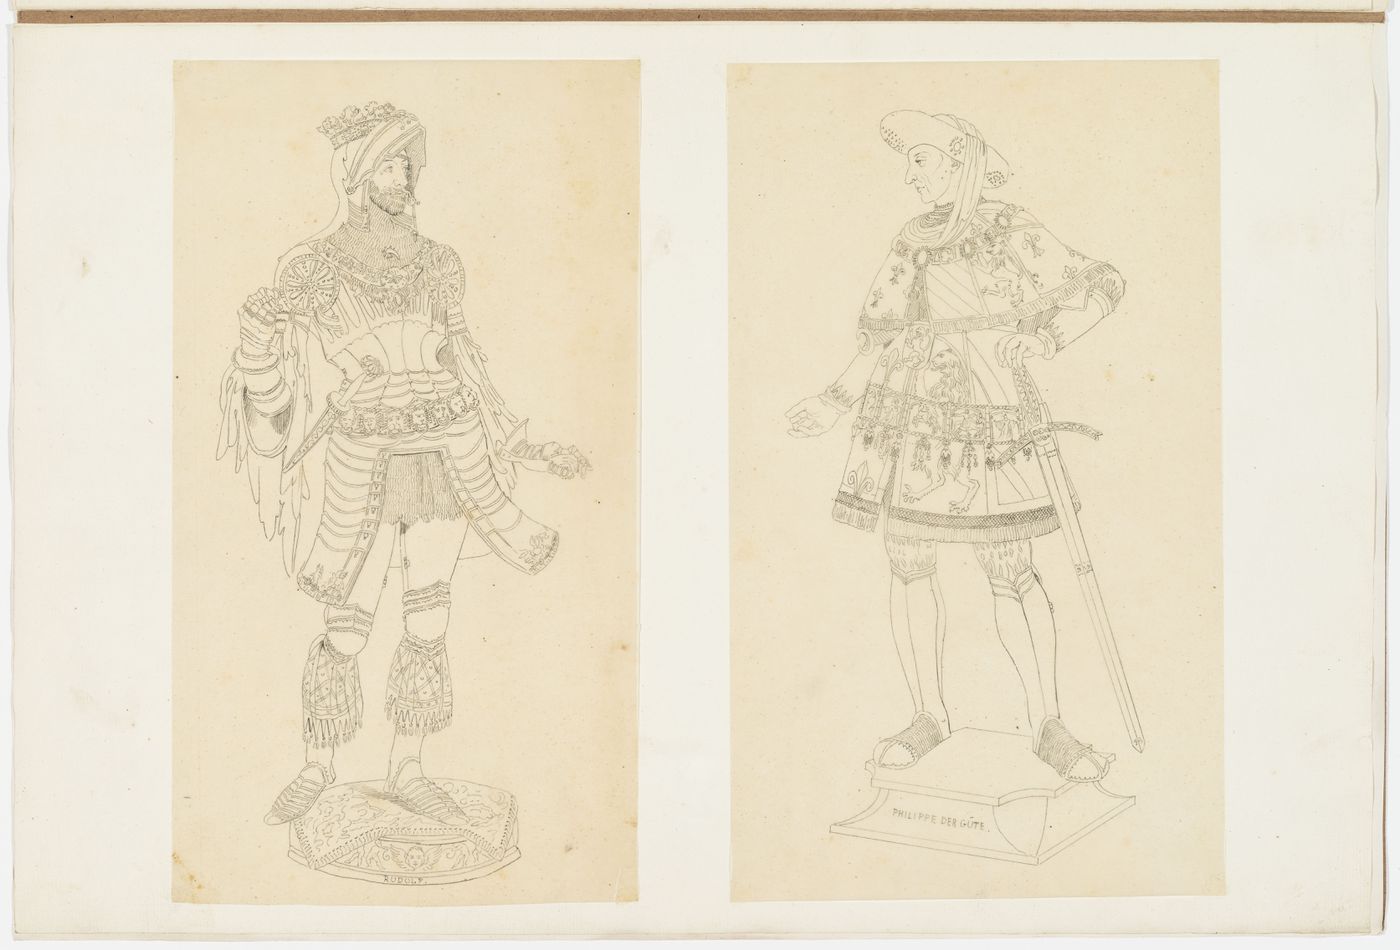 Drawings of statues of Philip the Good, Duke of Burgundy, and Emperor Rufolf of Habsburg, from the cenotaph of Maximilian I in the Hofkirche, Innsbruck